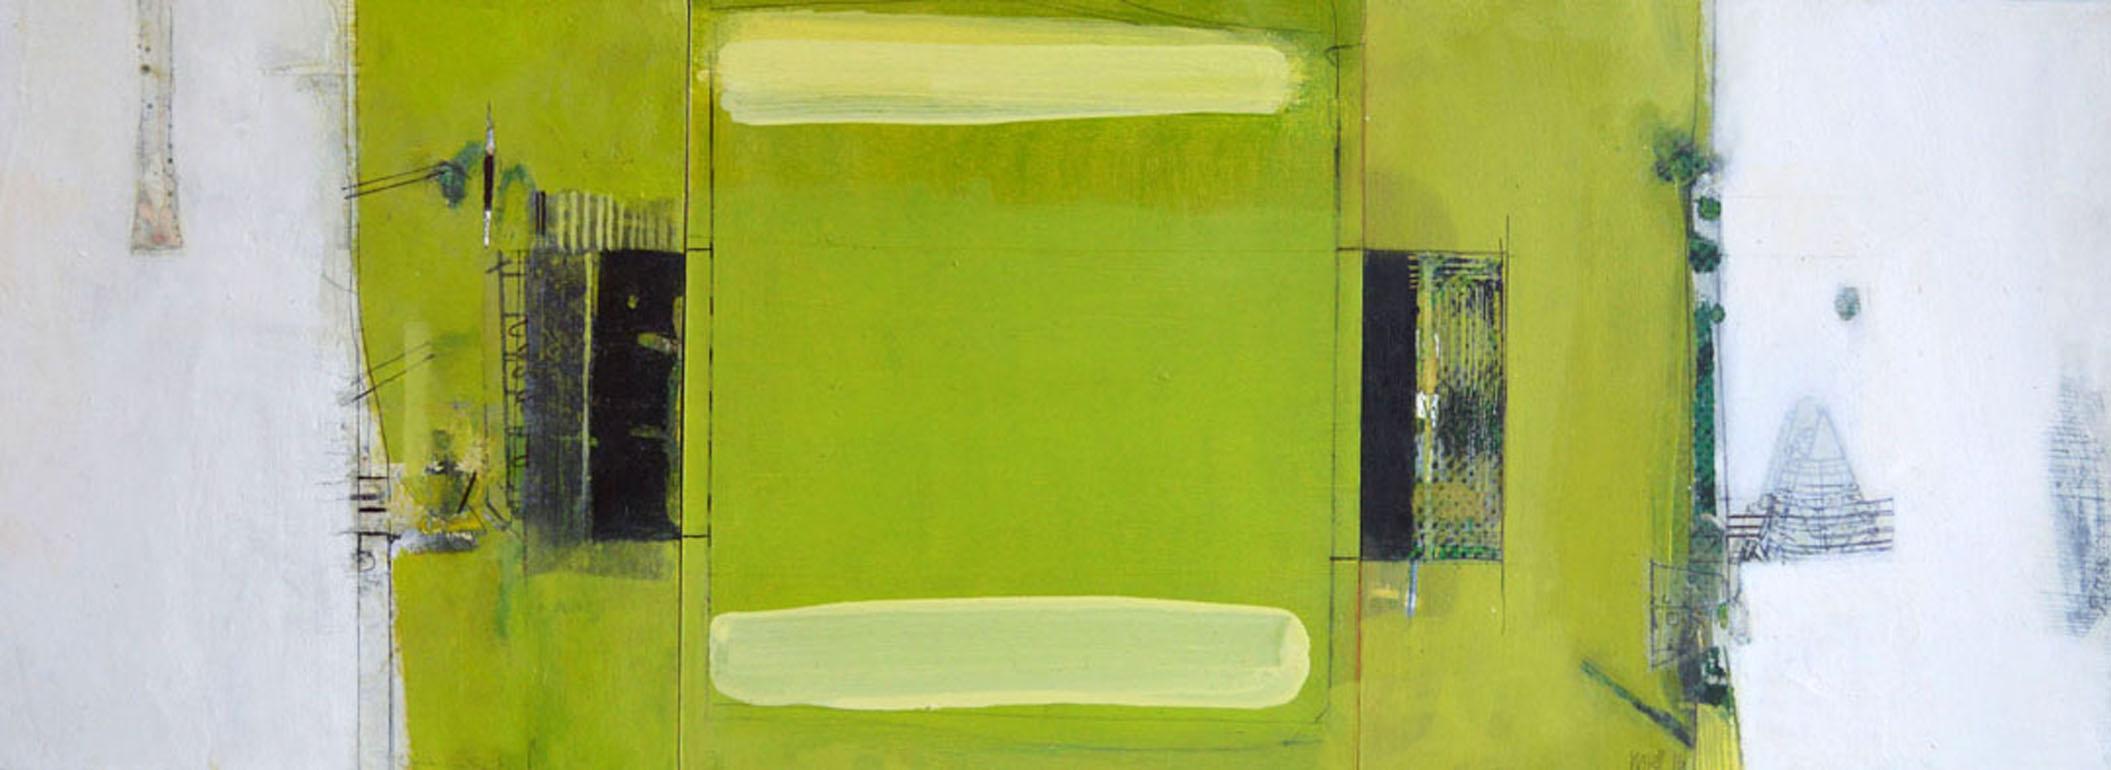 Array n 2 - contemporary mixed media green abstract painting on board - Mixed Media Art by Russell Frampton